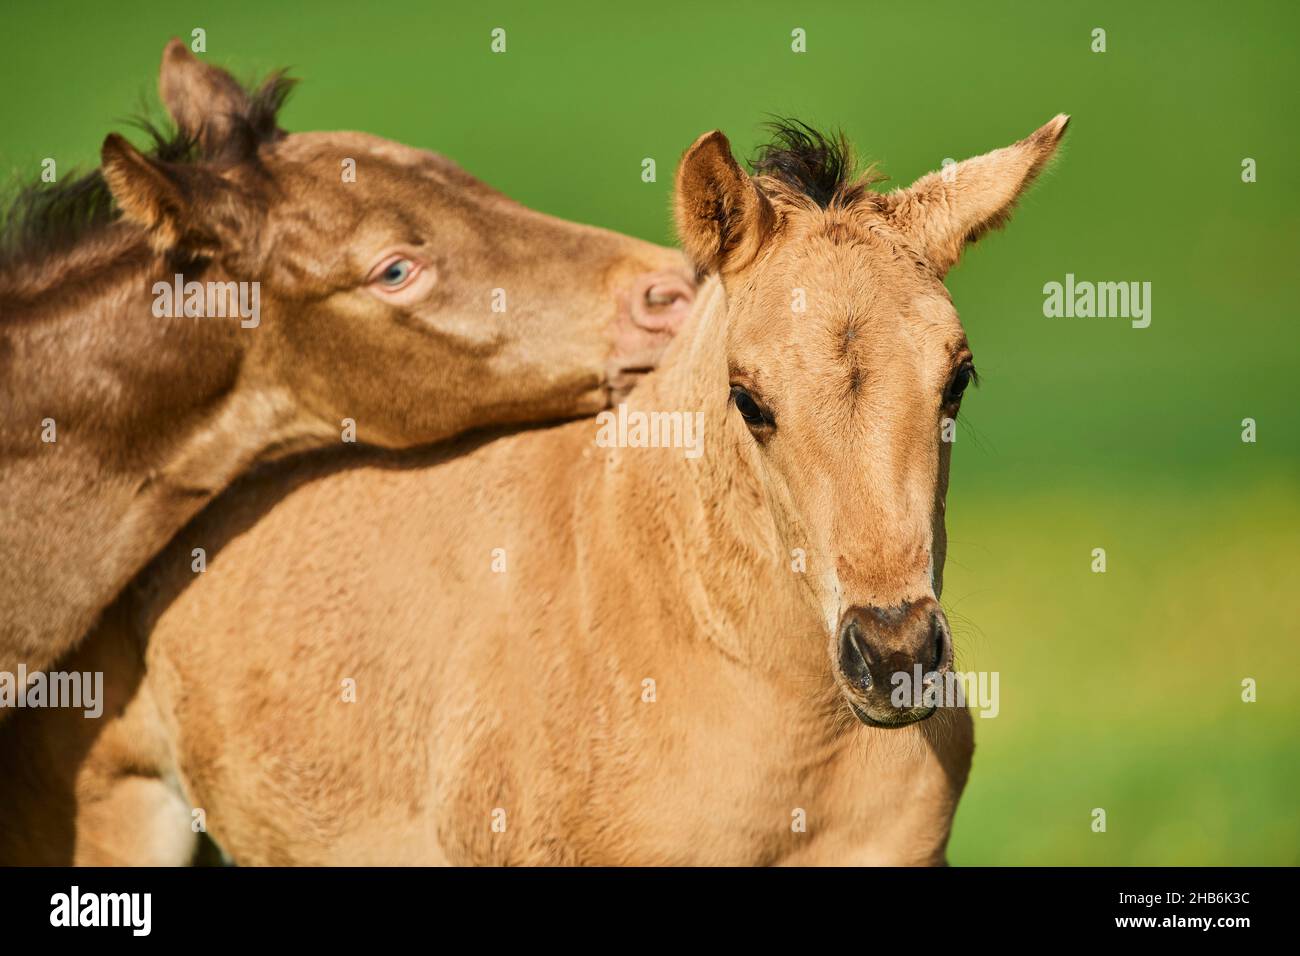 American Quarter Horse (Equus przewalskii f. caballus), hare and foal in physical contact, portrait, Germany Stock Photo